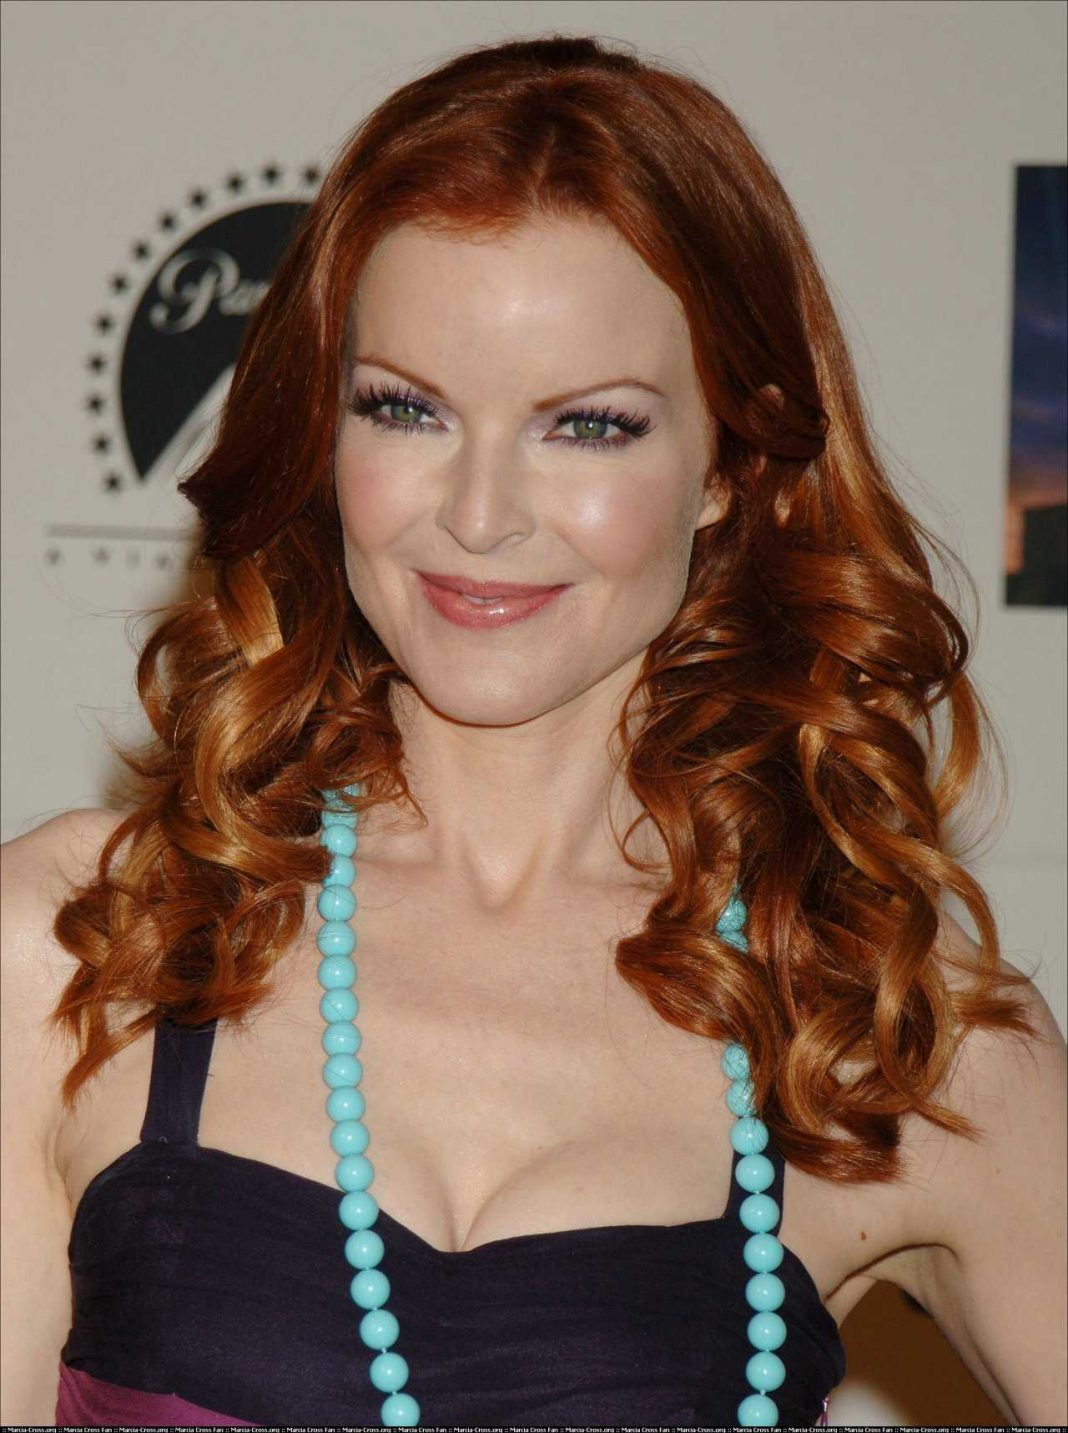 50 Marcia Cross Nude Pictures Uncover Her Attractive Physique 11